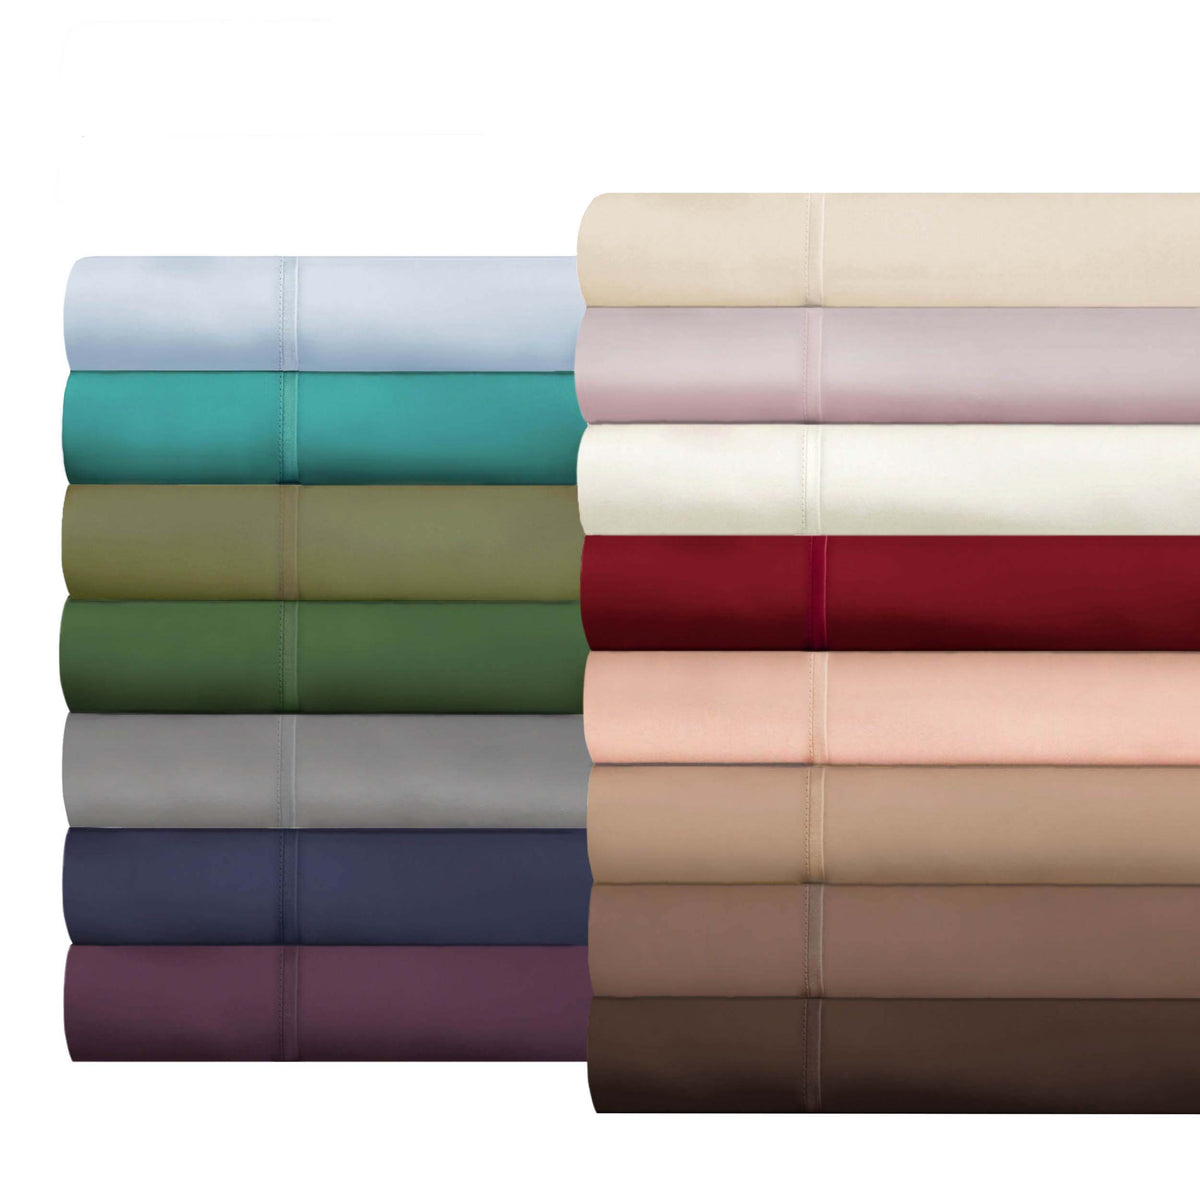 400 Thread Count Egyptian Cotton Solid Deep Pocket Sheet Set - Ivory